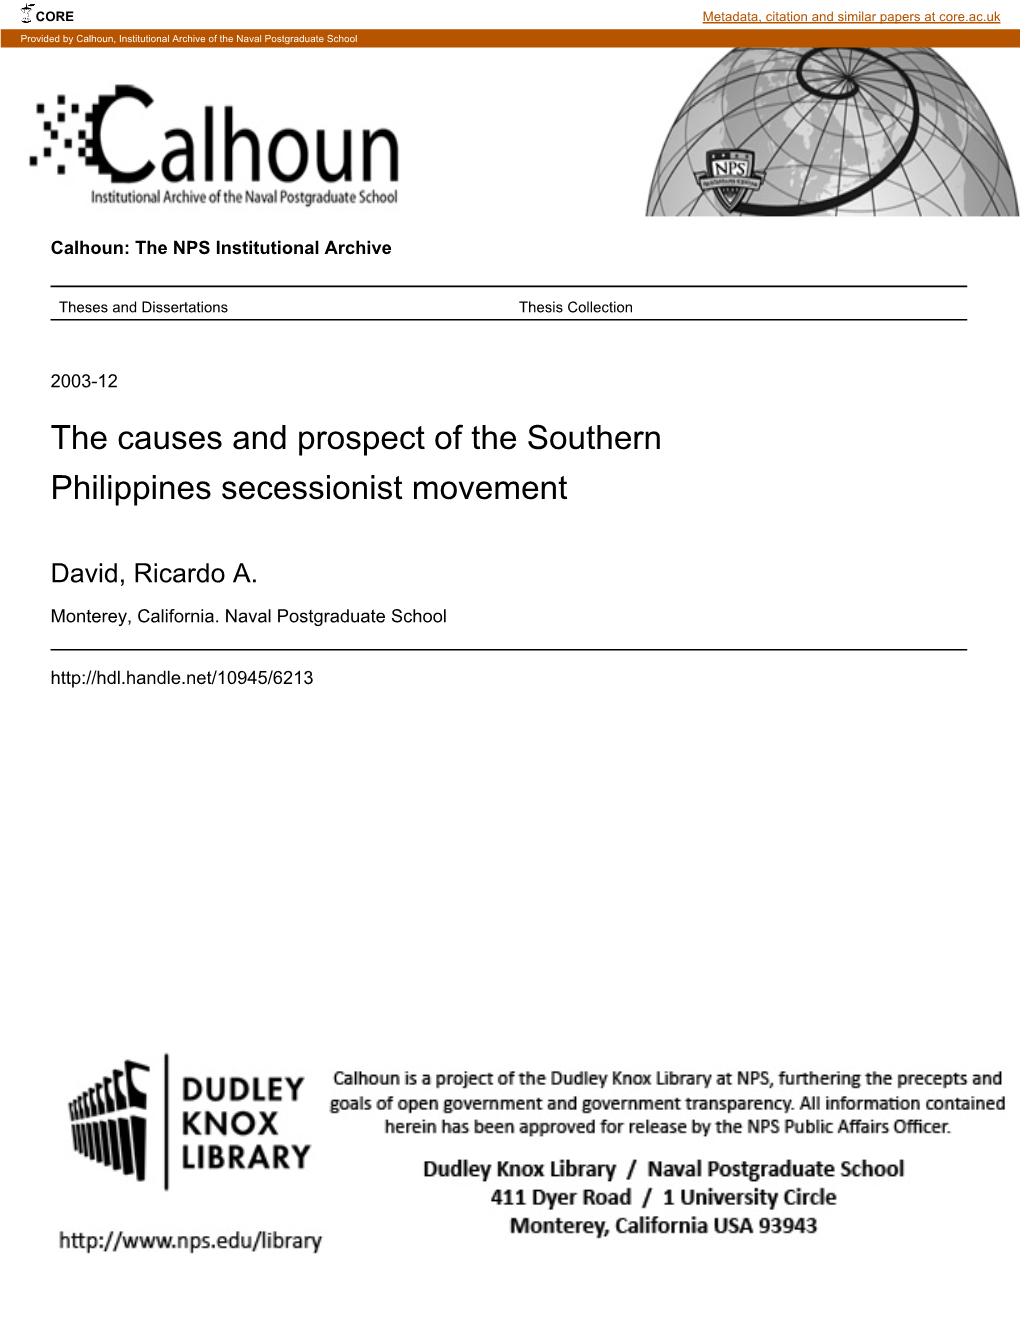 The Causes and Prospect of the Southern Philippines Secessionist Movement